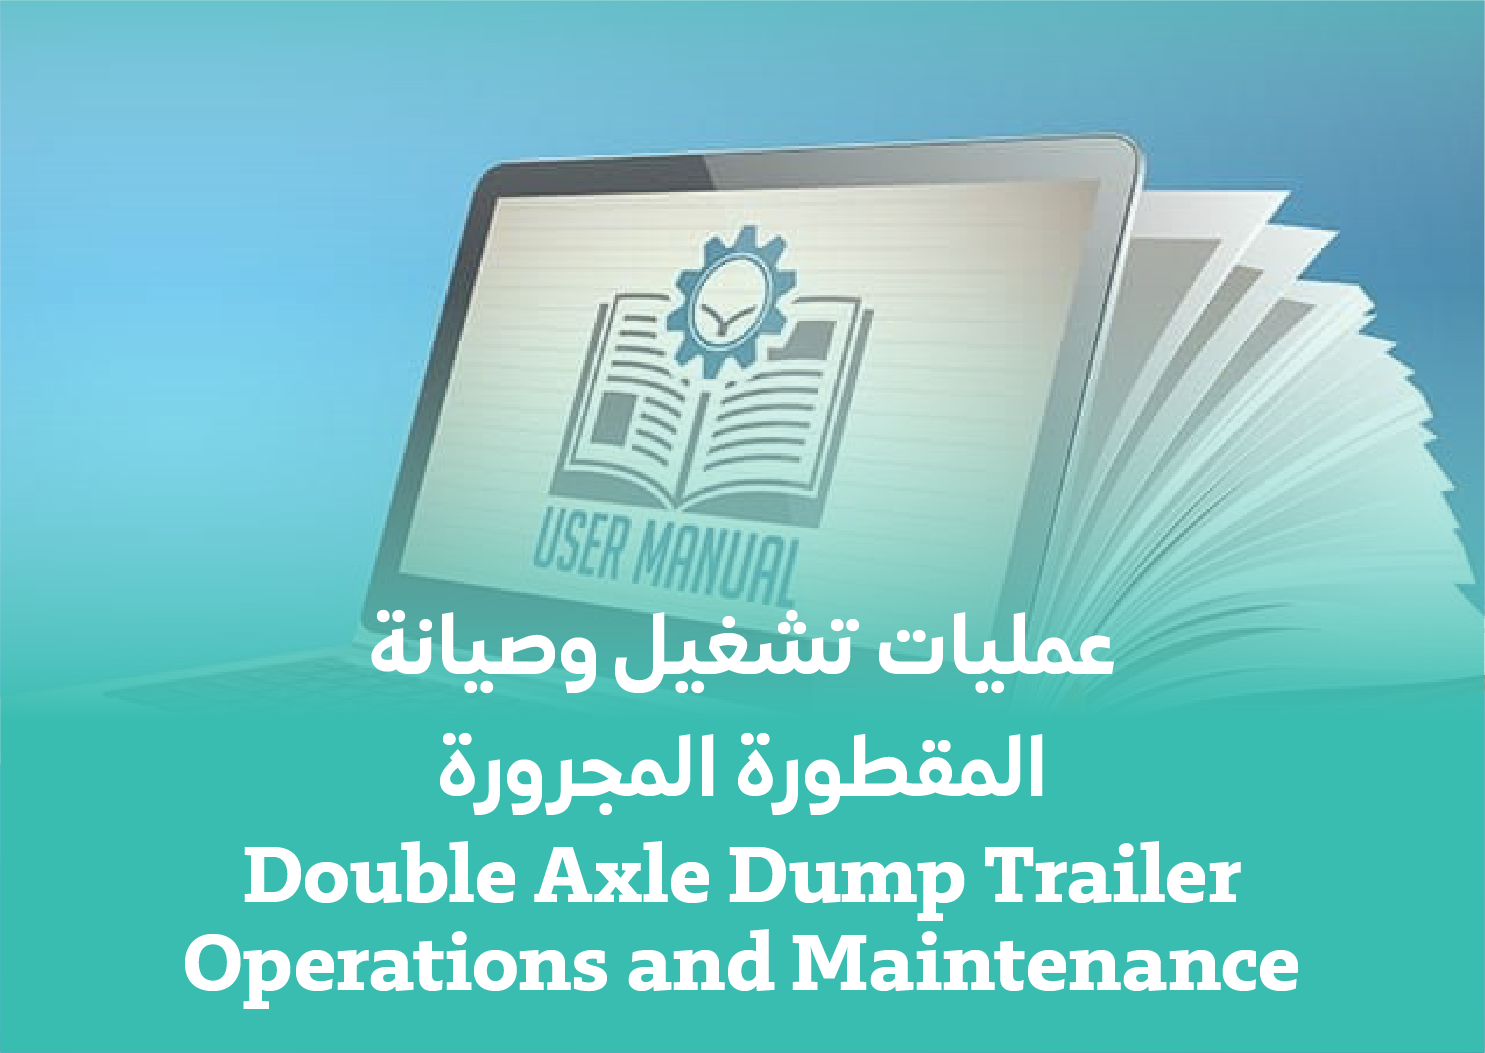 Double Axle Dump Trailer Operations and Maintenance